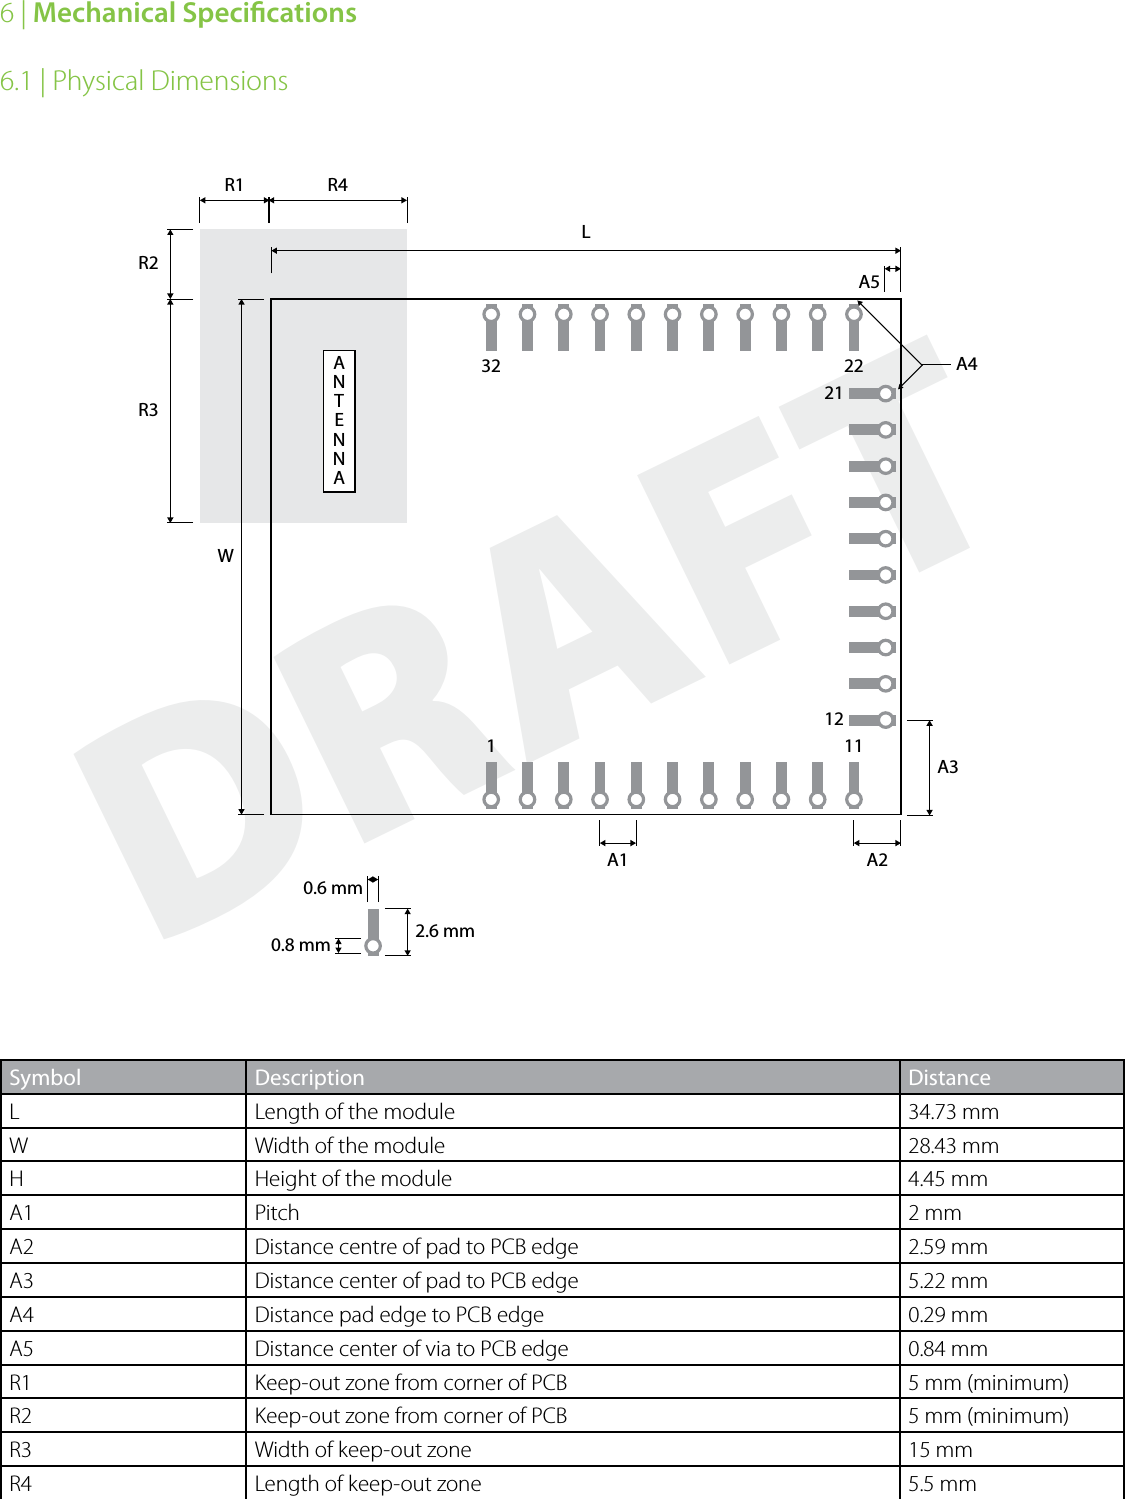 DRAFT6.1 | Physical DimensionsSymbol Description DistanceL Length of the module 34.73 mmW Width of the module 28.43 mmH Height of the module 4.45 mmA1 Pitch 2 mmA2 Distance centre of pad to PCB edge 2.59 mmA3 Distance center of pad to PCB edge 5.22 mmA4 Distance pad edge to PCB edge 0.29 mmA5 Distance center of via to PCB edge 0.84 mmR1 Keep-out zone from corner of PCB 5 mm (minimum)R2 Keep-out zone from corner of PCB 5 mm (minimum)R3 Width of keep-out zone 15 mmR4 Length of keep-out zone 5.5 mm1 1132 221221A5LWA4A2A3A12.6 mm0.6 mm0.8 mmR2R1 R4R3ANTENNA6 | Mechanical Specications